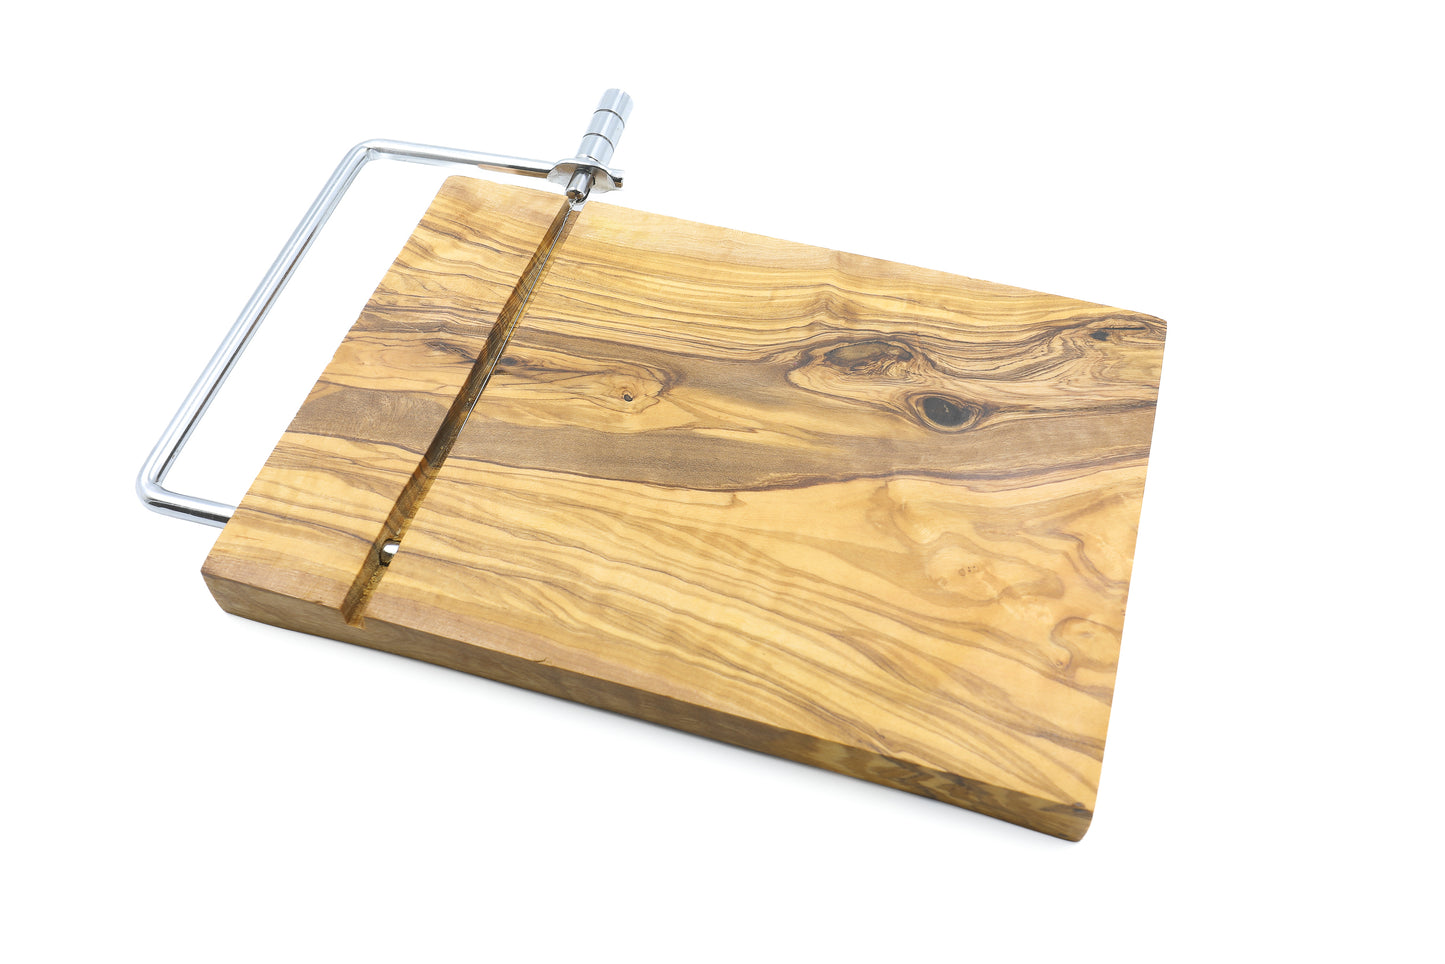 High-quality olive wood cheese slicer with an elegant board and girolle swiss